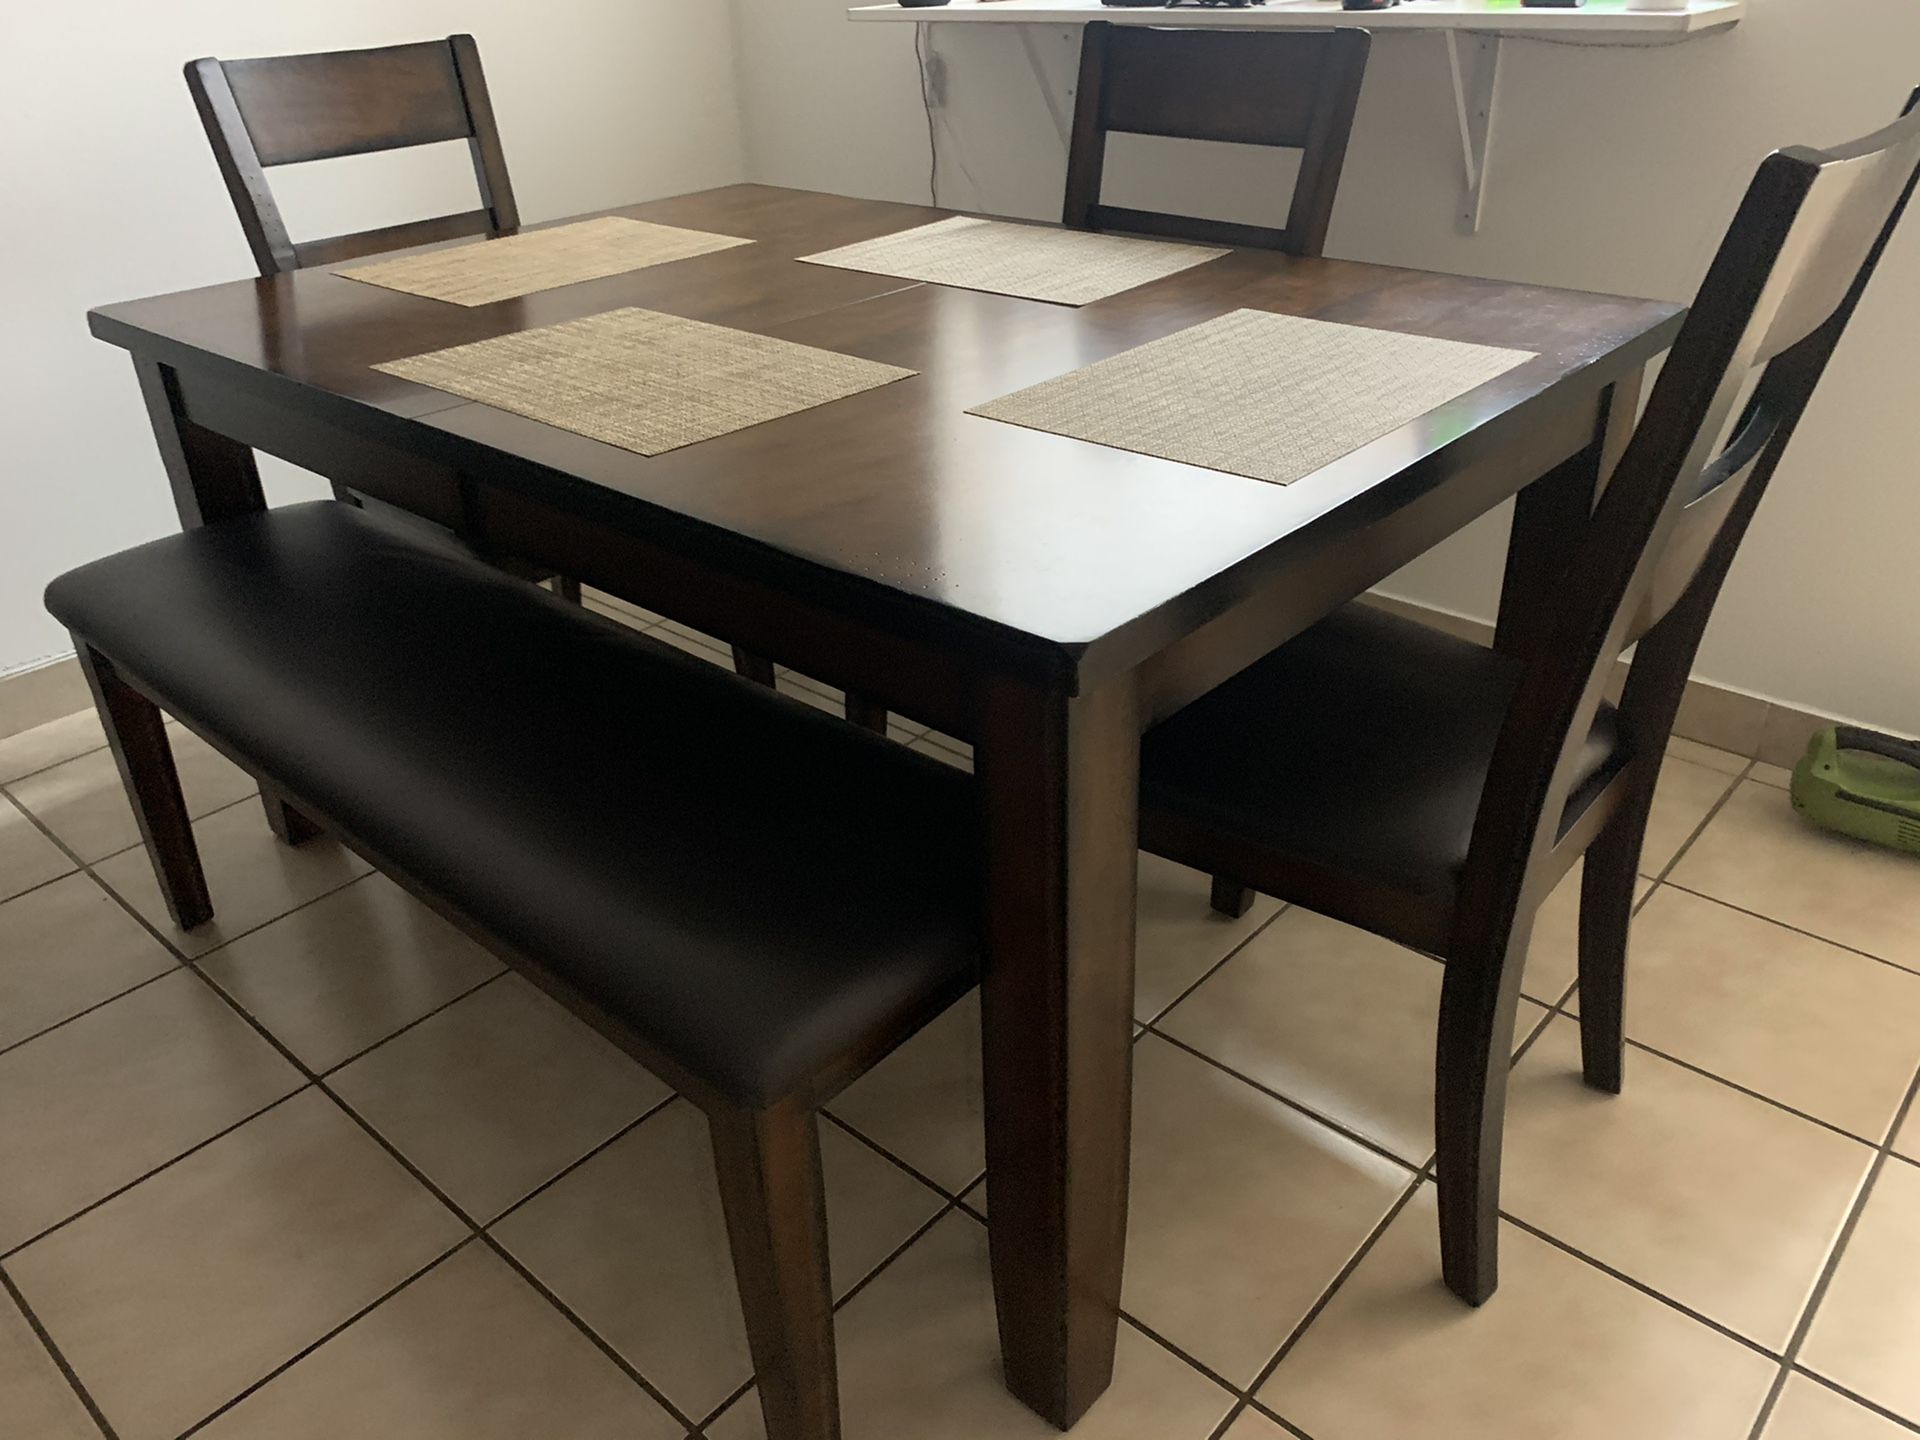 Solid wood dining table. Expandable. Very good condition.